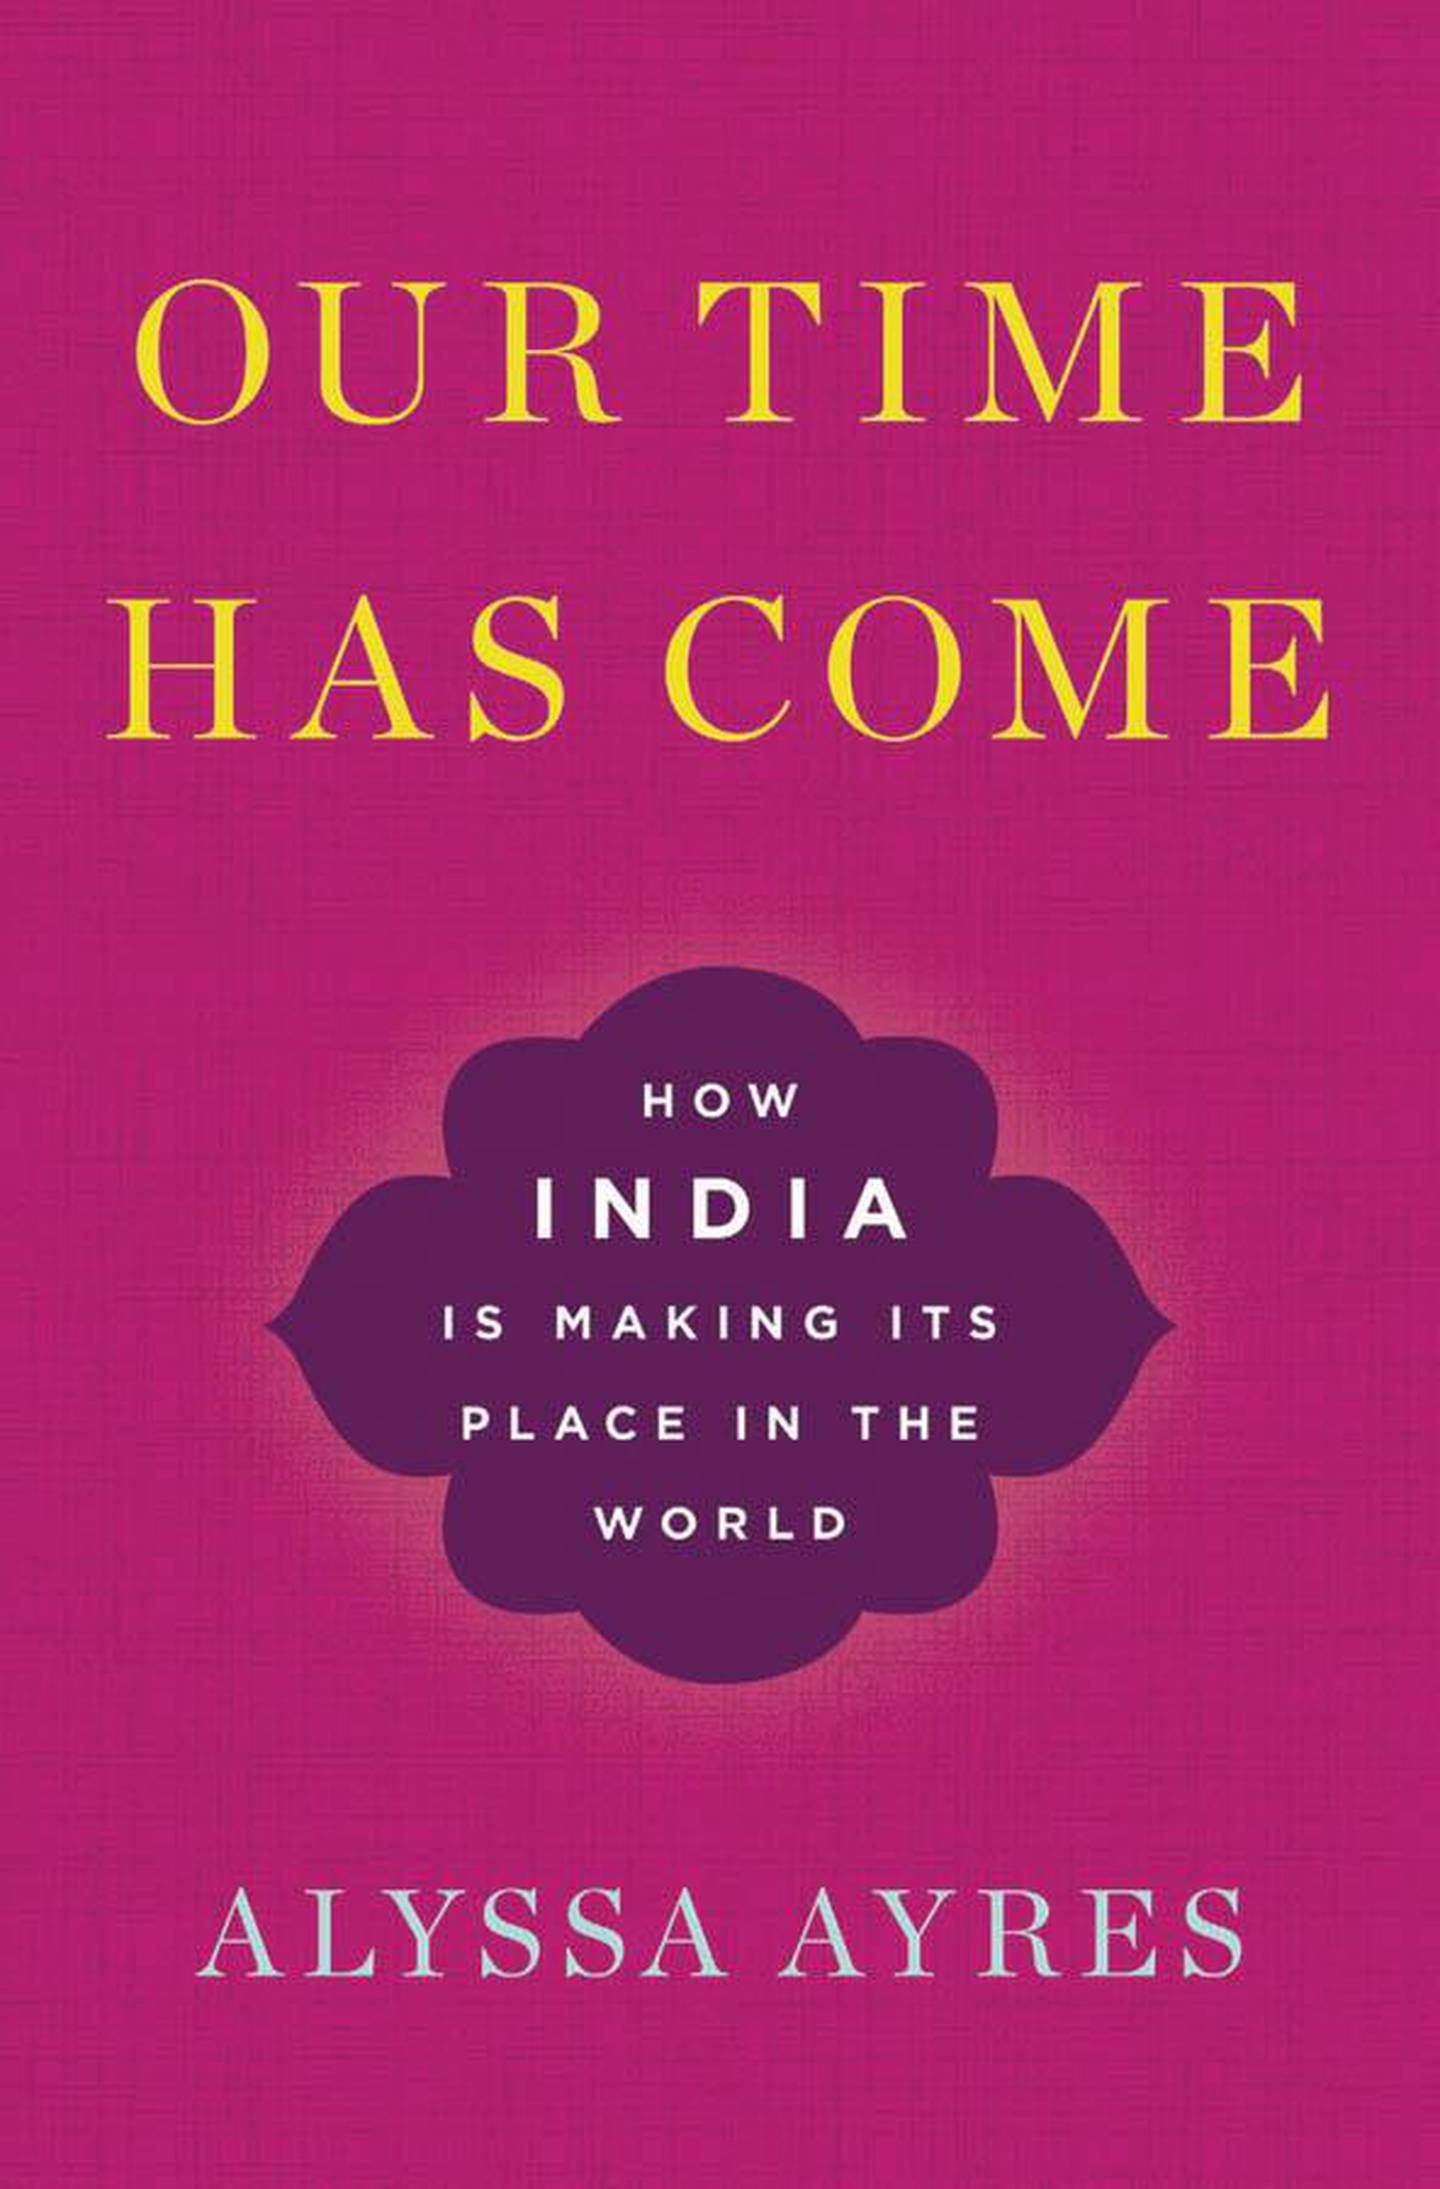 Our Time Has Come: How India is Making Its Place in the World by Alyssa Ayres. Courtesy Oxford University Press